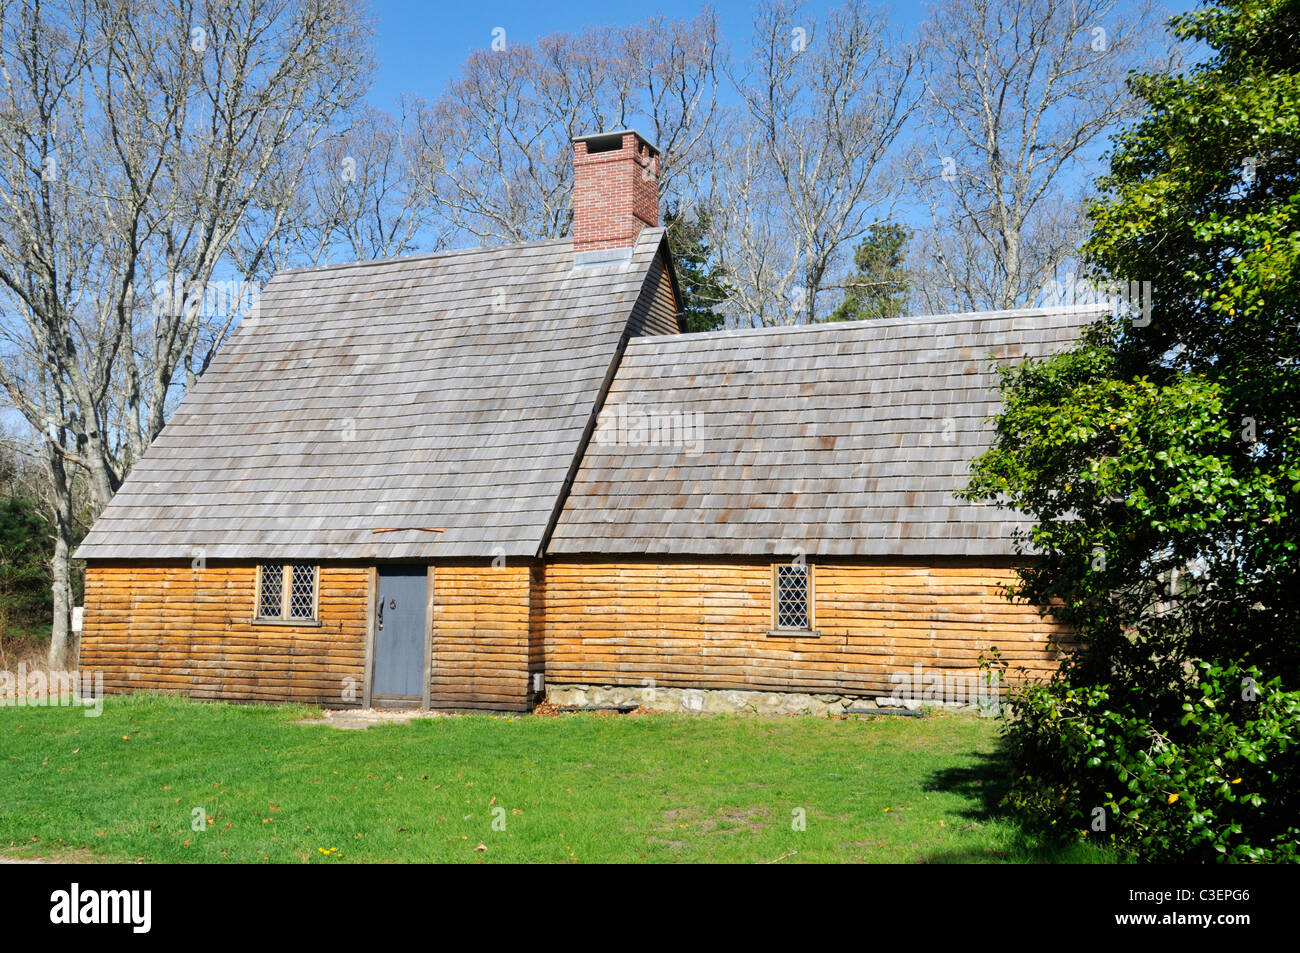 Historic Aptucxet trading post built by the Pilgrims for trading with the Wampanoag indians and the Dutch. Cape Cod USA Stock Photo